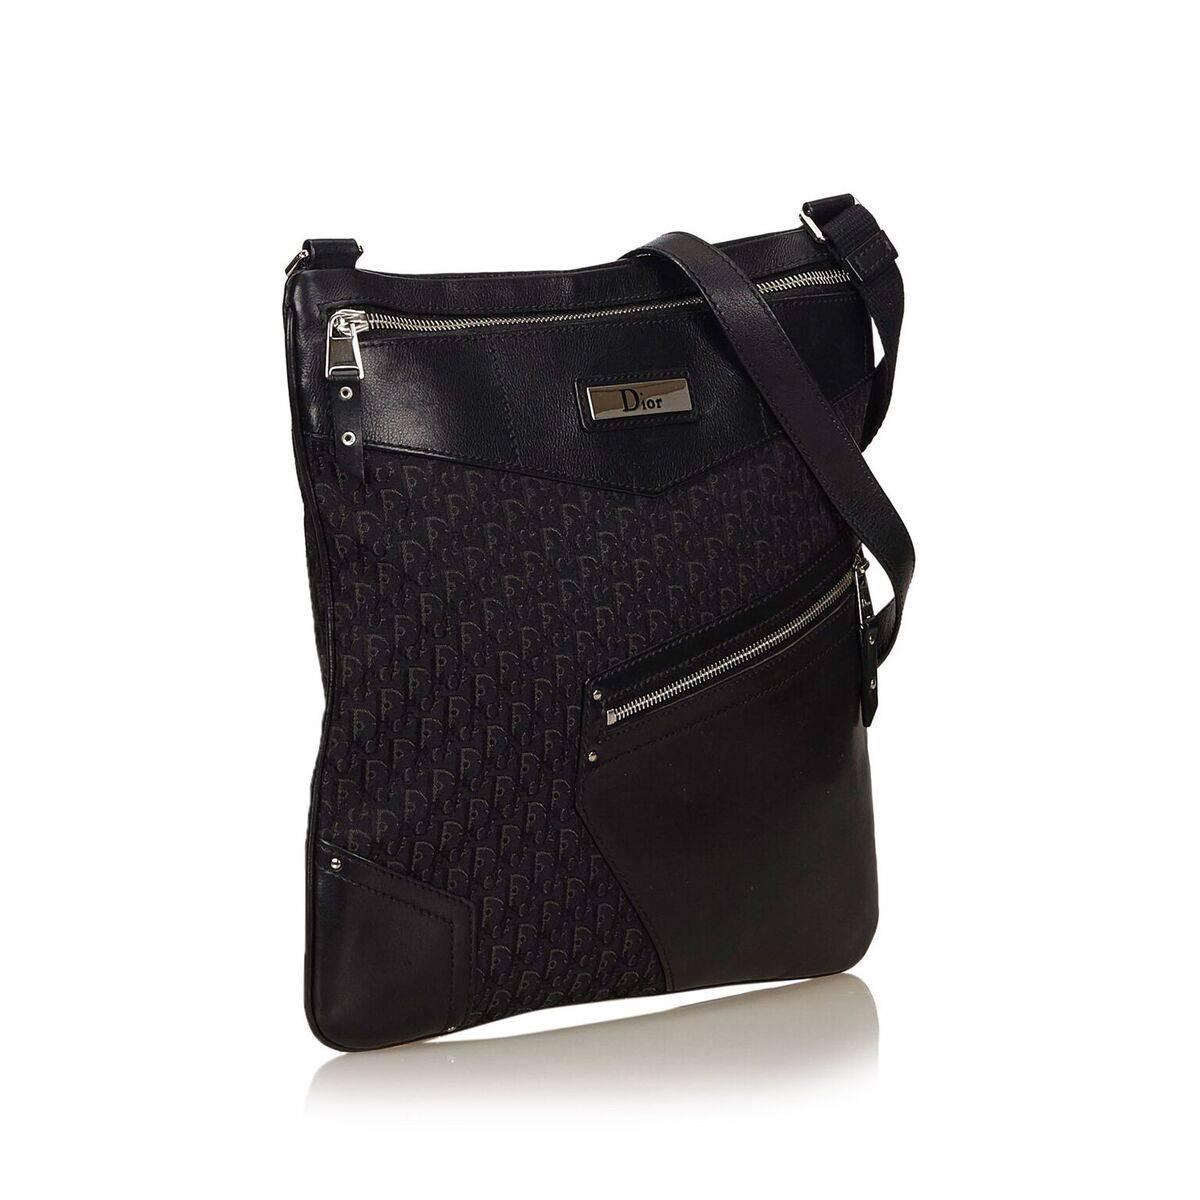 Product details:  Black oblique jacquard crossbody bag by Christian Dior.  Trimmed with leather.  Top zip closure.  Lined interior with inner zip pocket.  Exterior zip pocket.  Silvertone hardware.  11